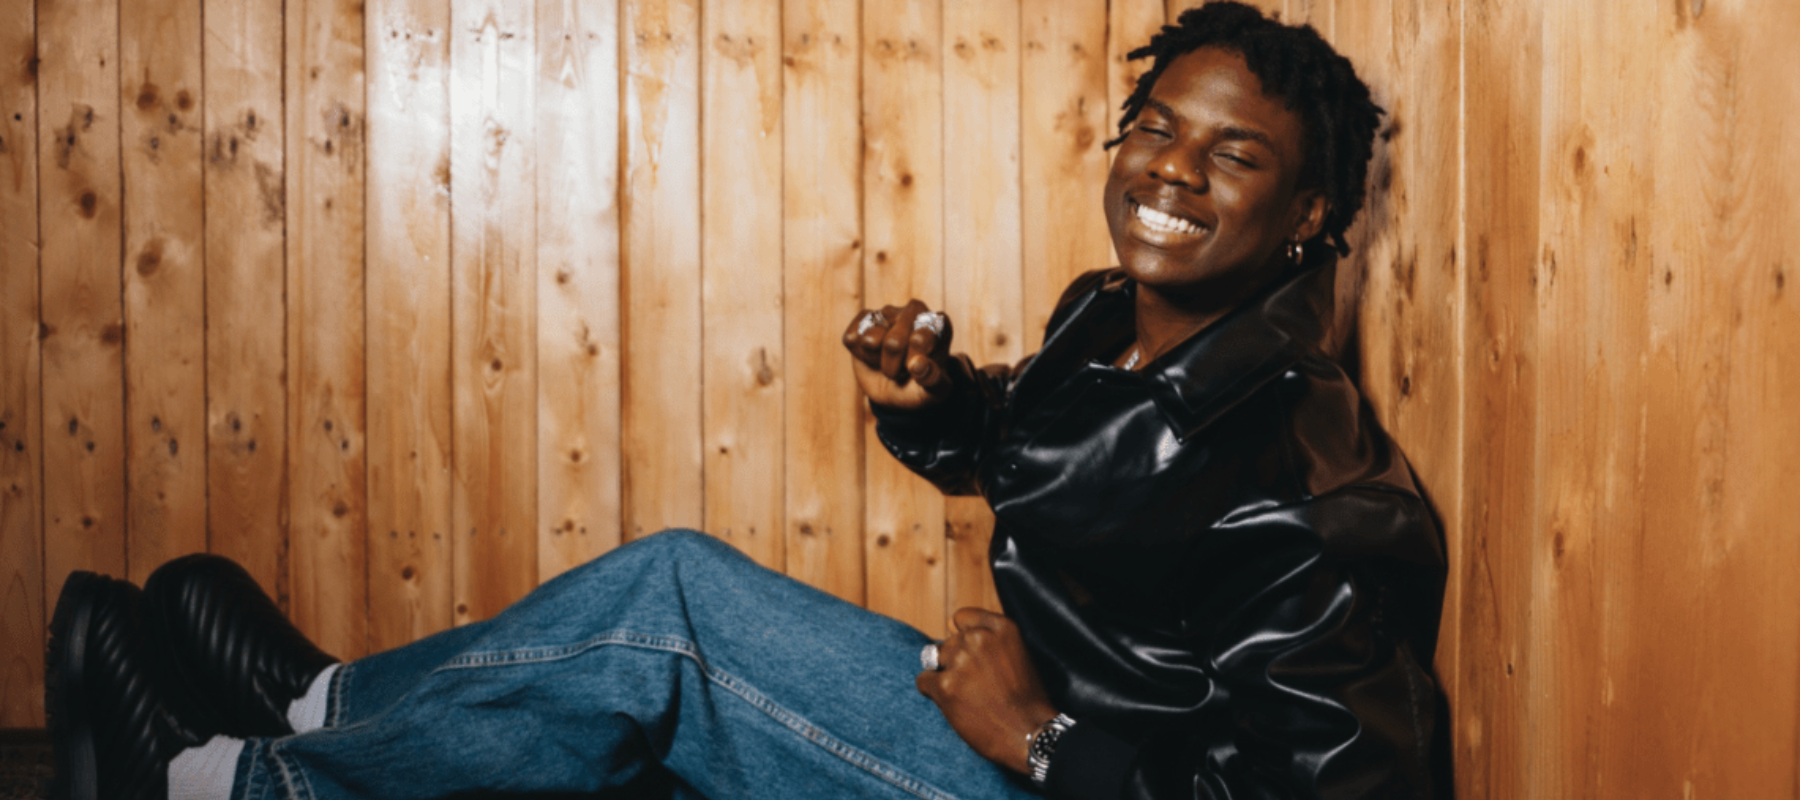 REMA SETS A NEW RECORD WITH ‘RAVE & ROSES’ GOING PLATINUM IN CANADA.